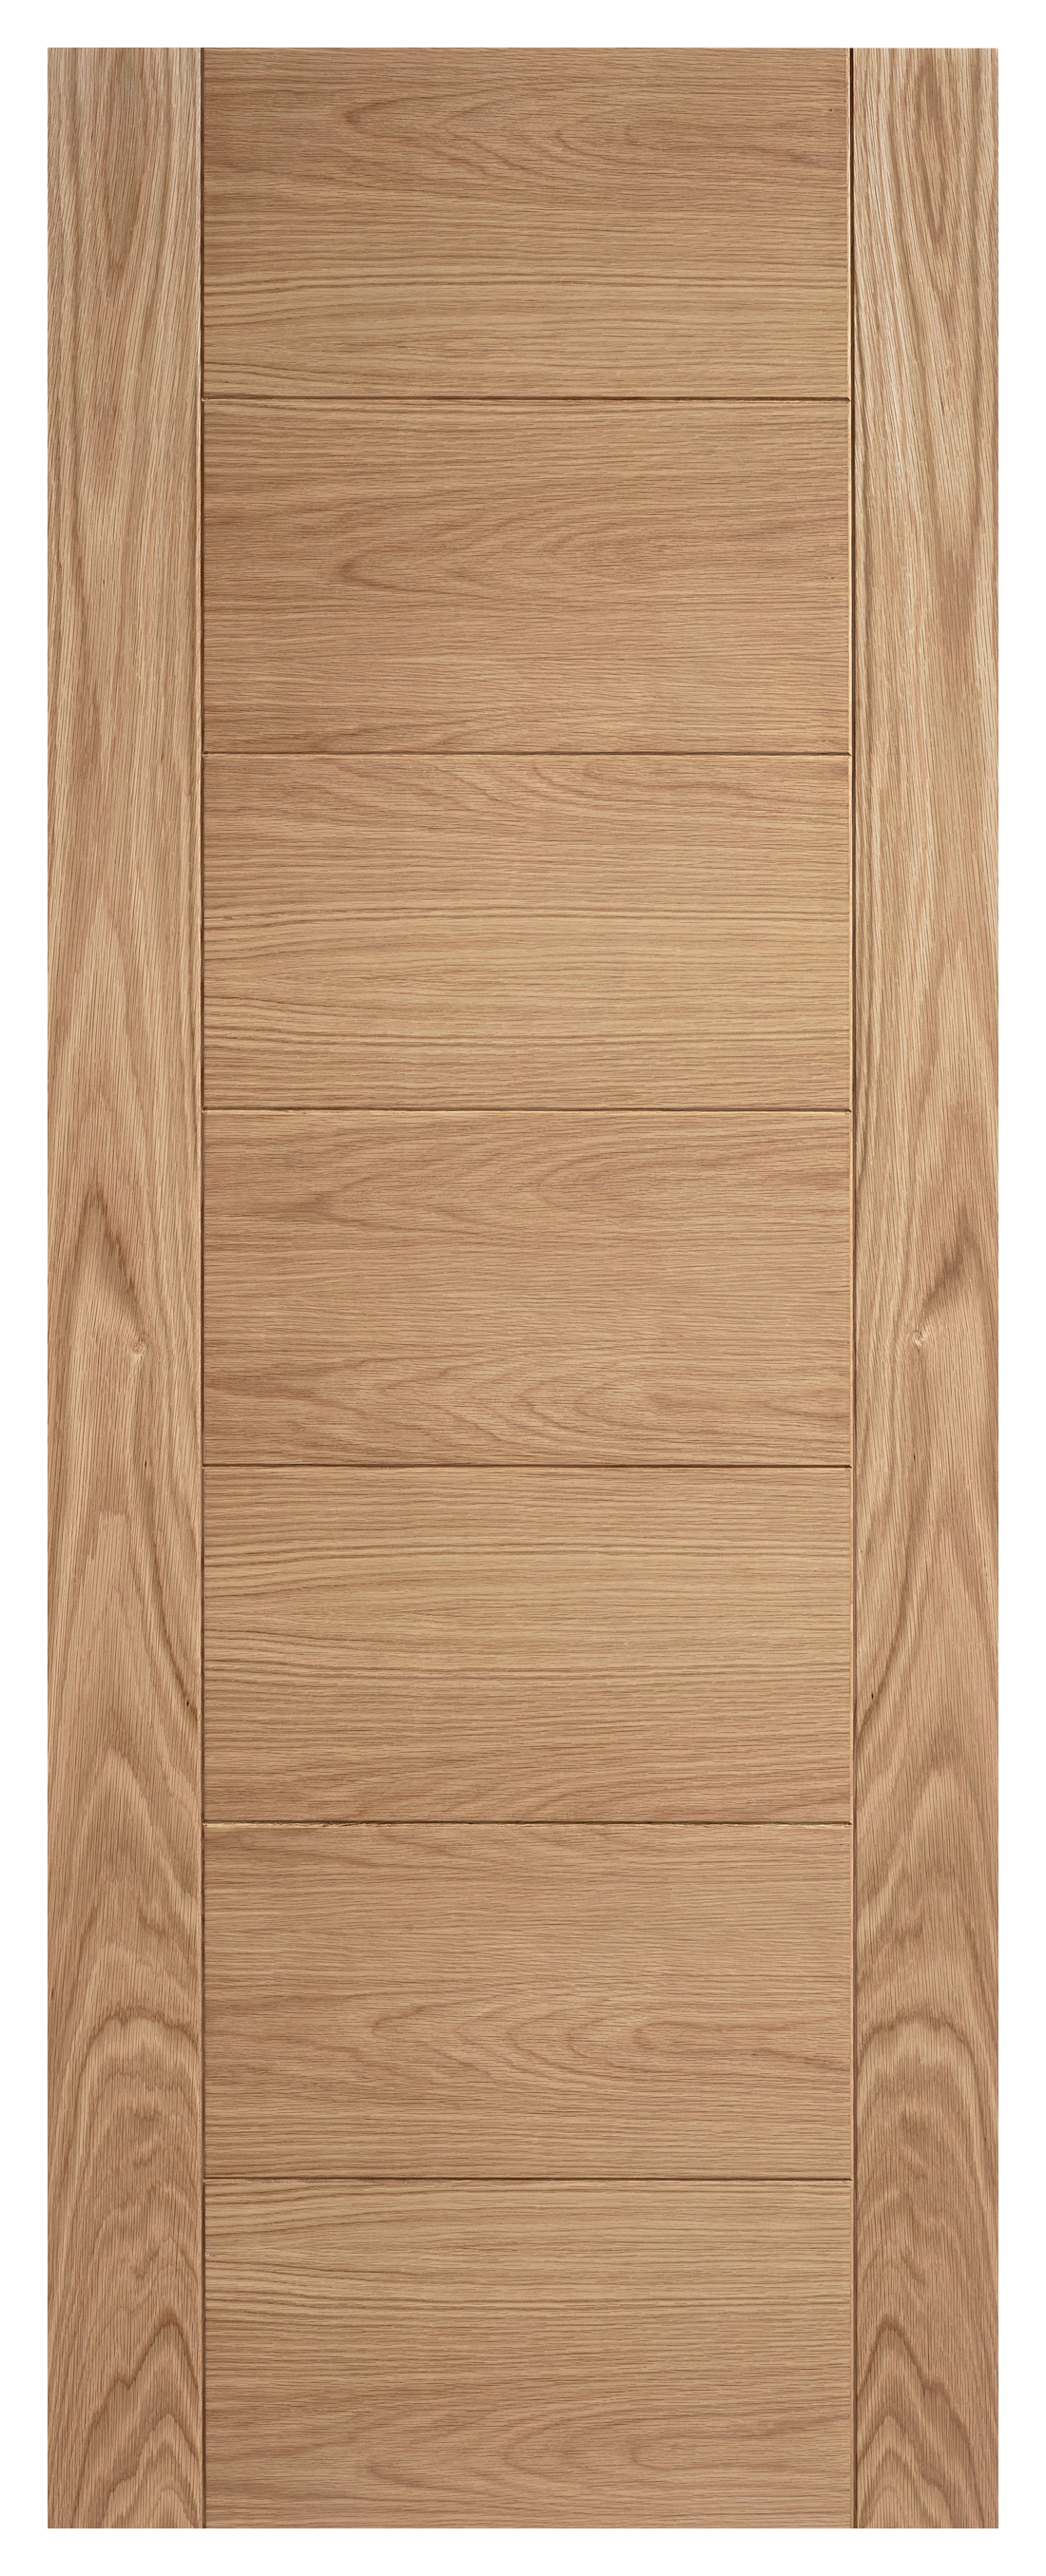 Image of LPD Internal Carini 7 Panel Pre-Finished Oak Solid Core Door - 711 x 1981mm